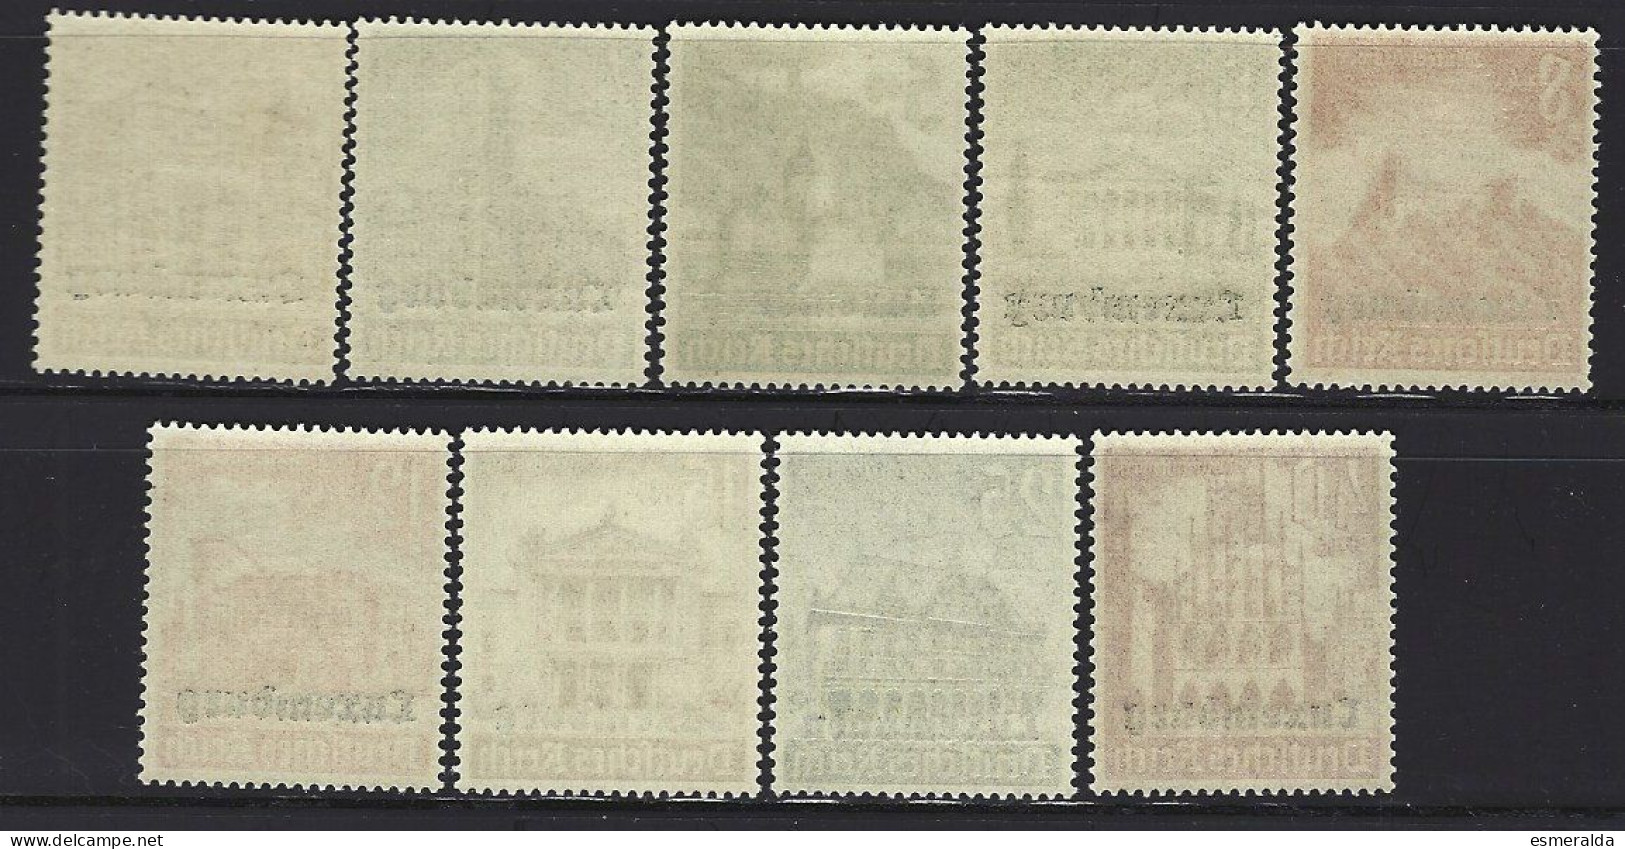 Luxembourg Yv Occupation Allemande 33/41(Secours D'hiver) Surchargés, **/mnh - 1940-1944 Occupazione Tedesca